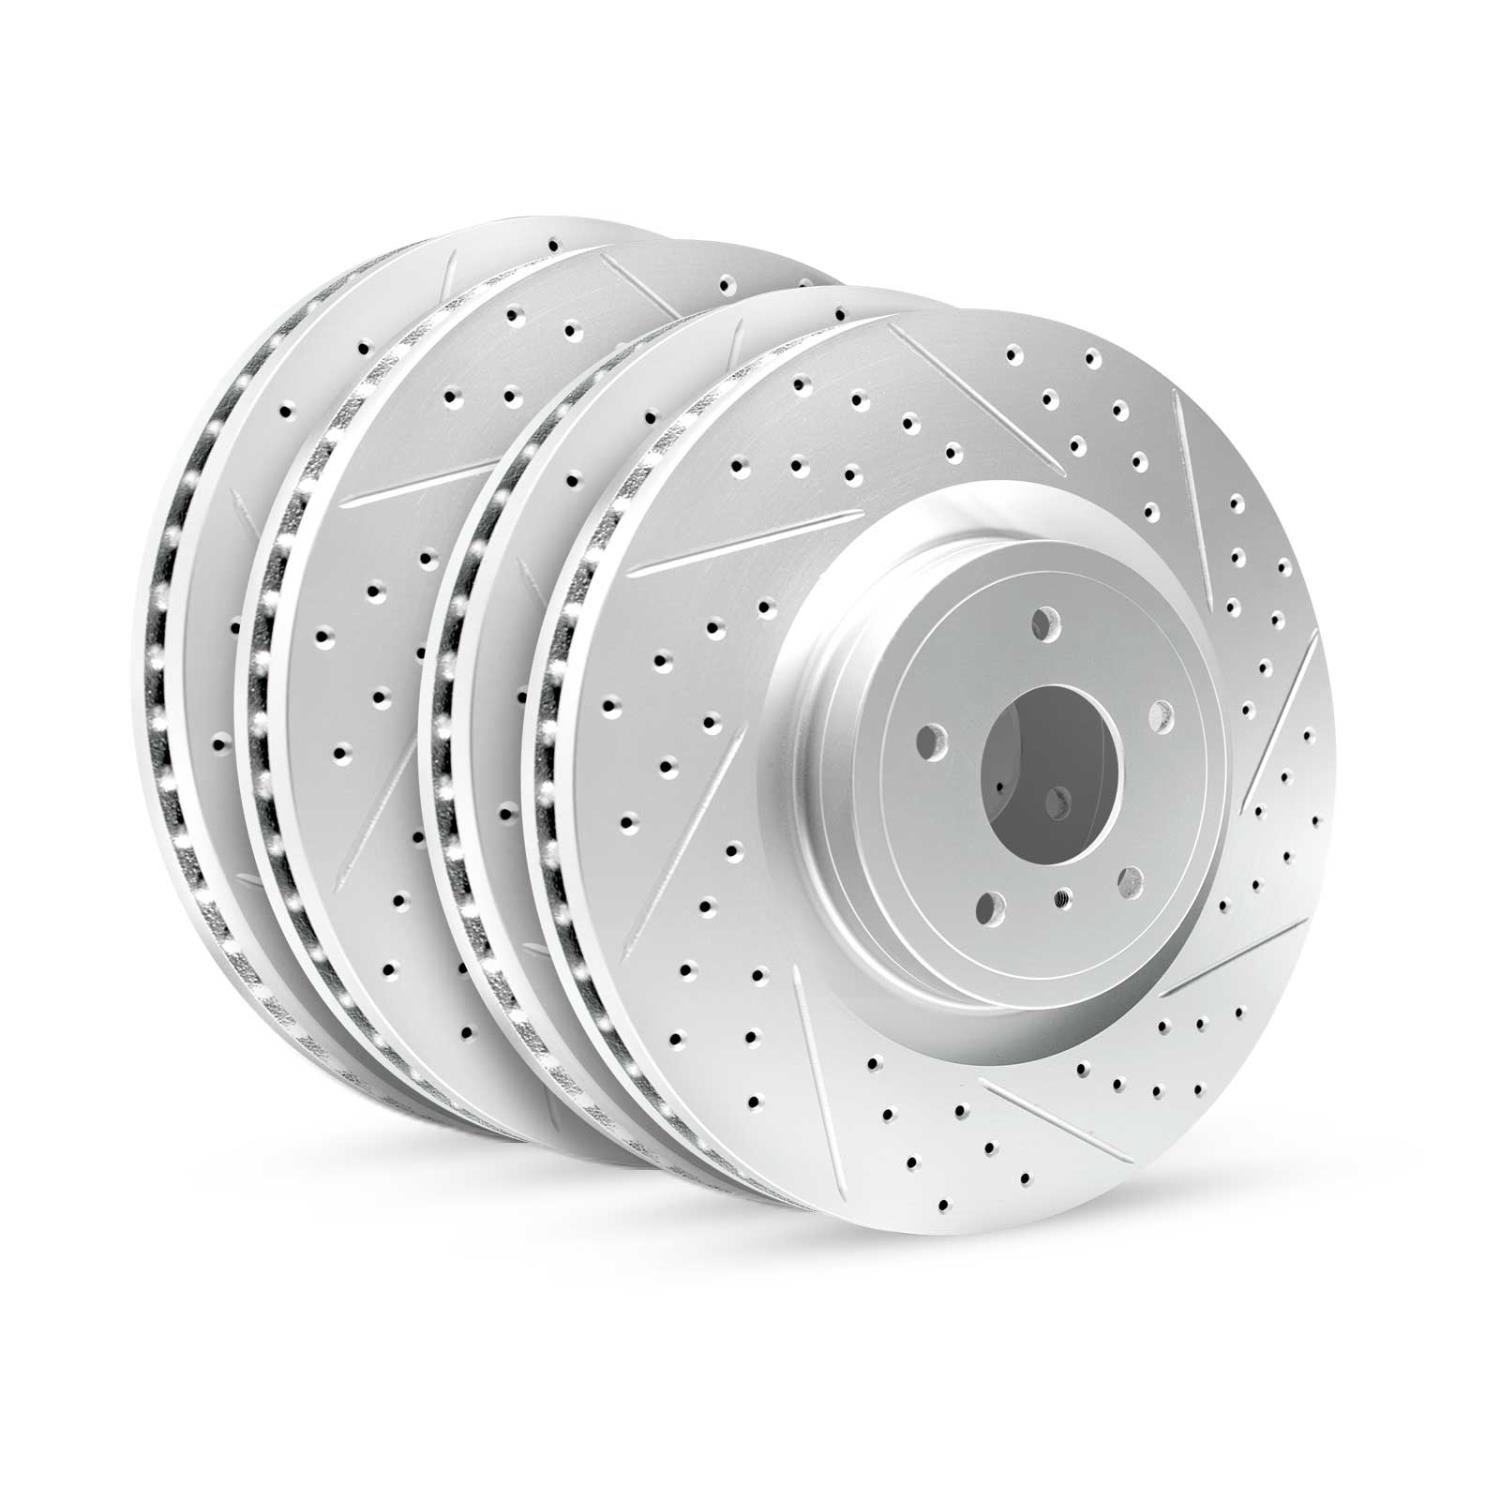 GEO-Carbon Drilled/Slotted Rotors, 1996-1997 Ford/Mazda,